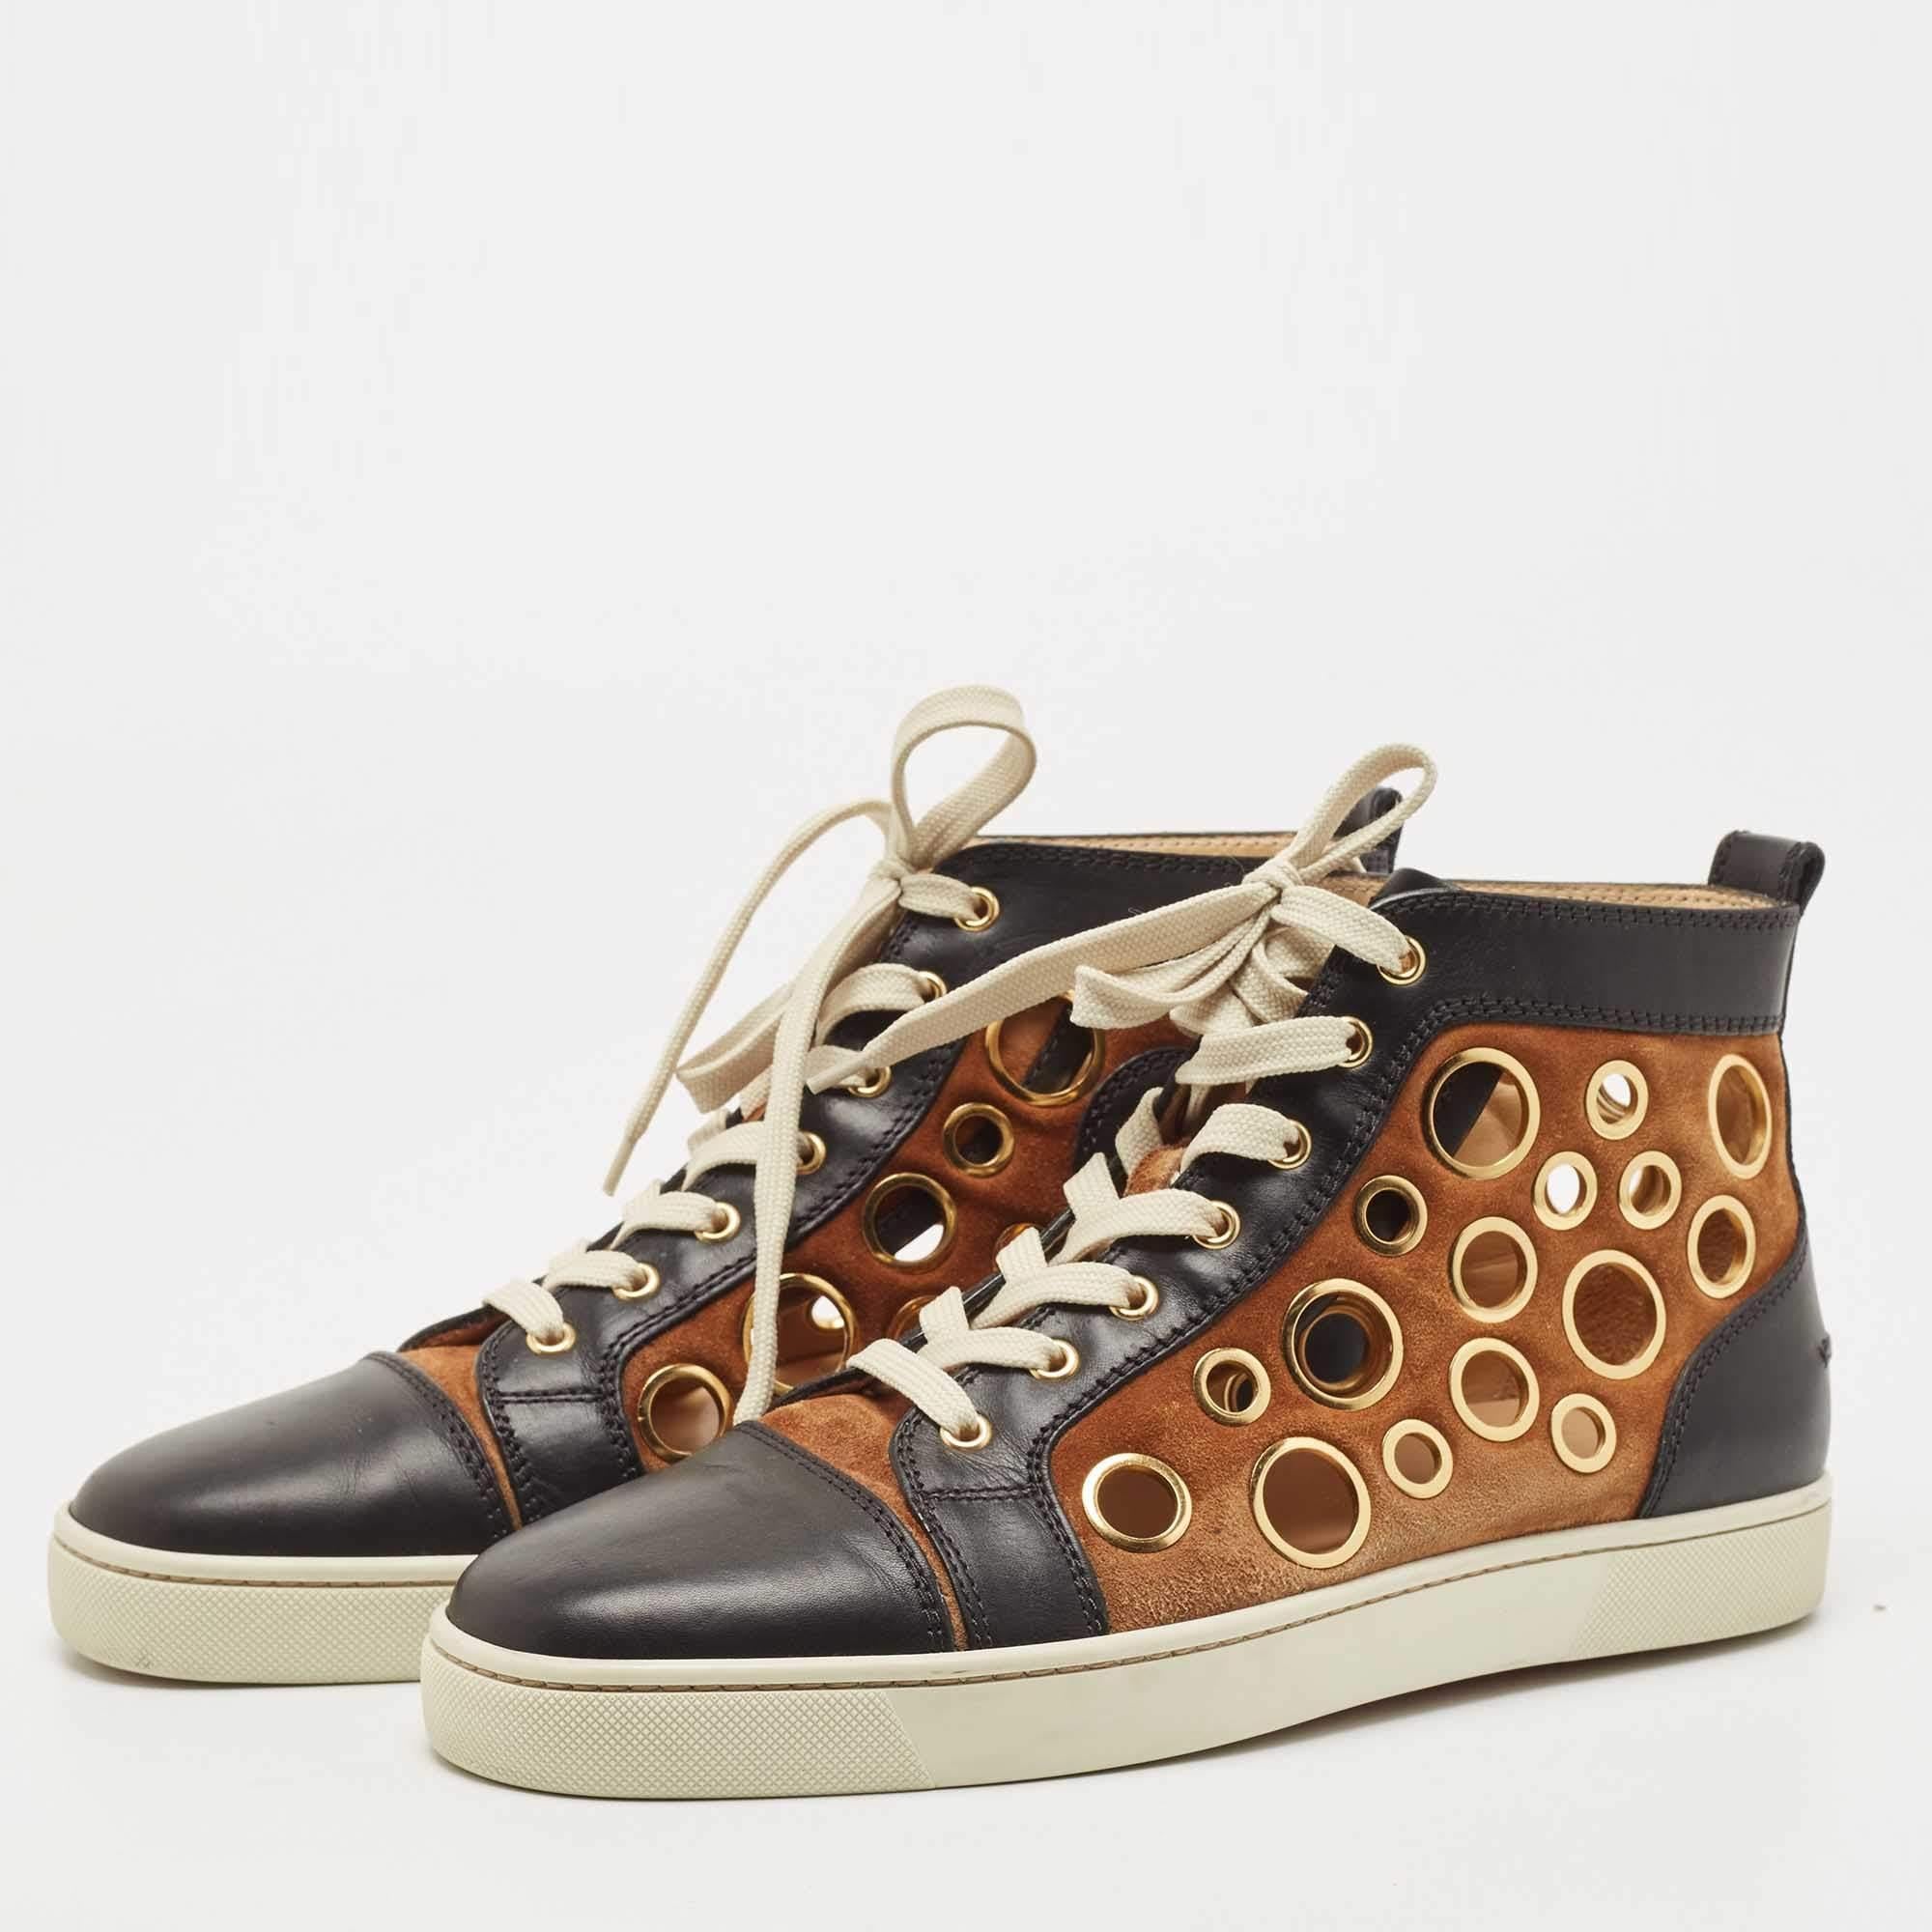 Fall in love with casual wear every time you step out in these sneakers from Christian Louboutin. They've been crafted from leather and suede and styled as a high top with an exterior breathtakingly lined with bubble cutouts. The sneakers carry